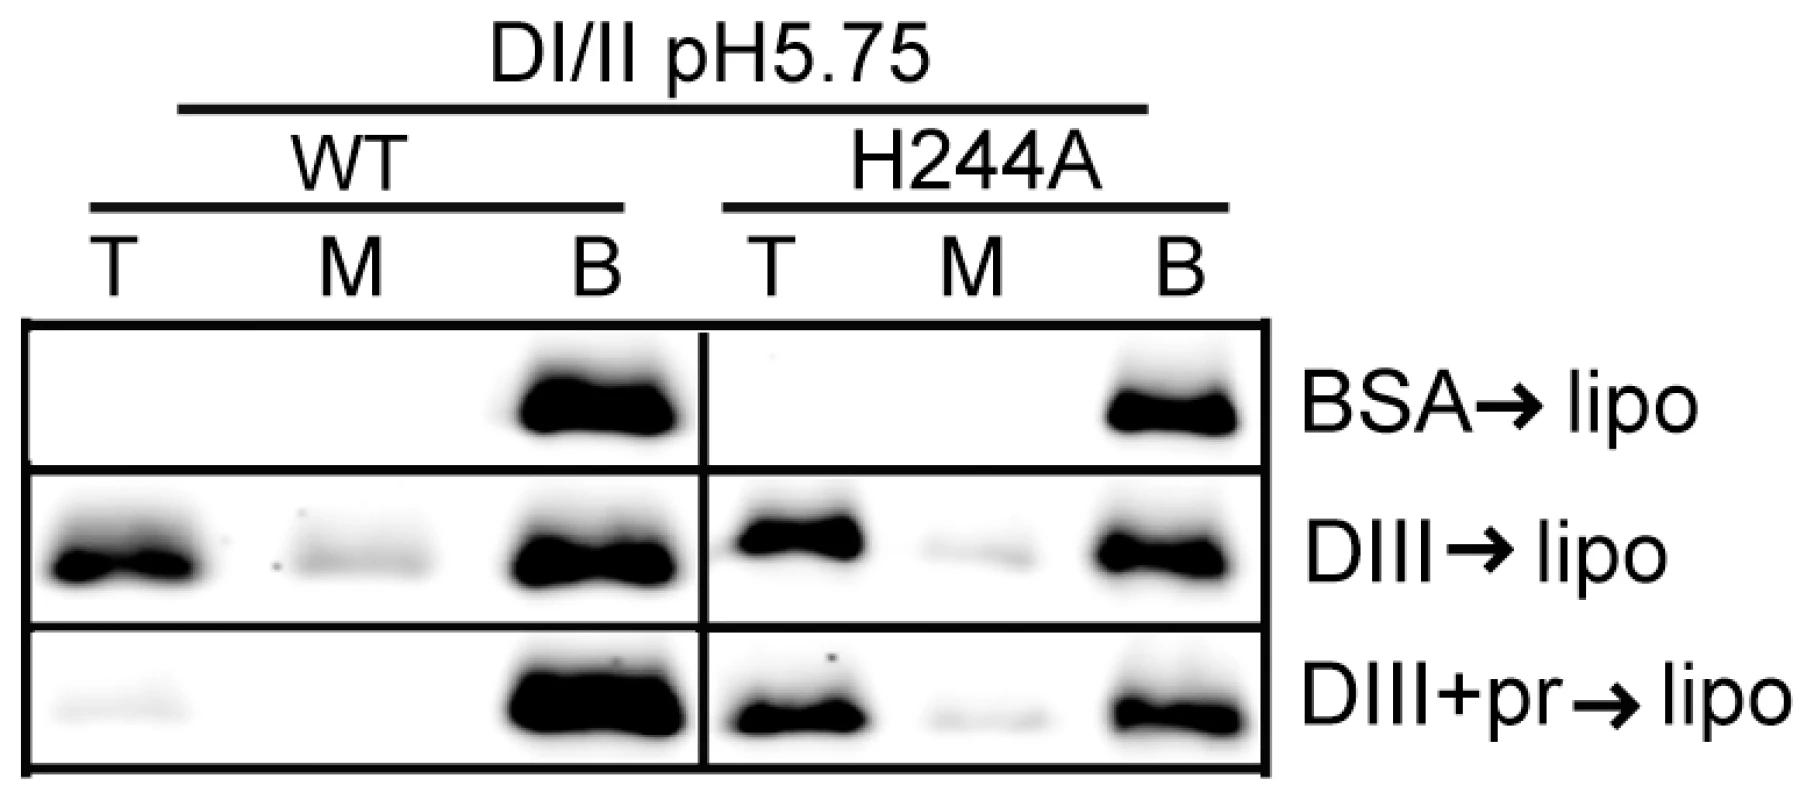 H244A E protein interacts with membranes and is resistant to inhibition by pr.